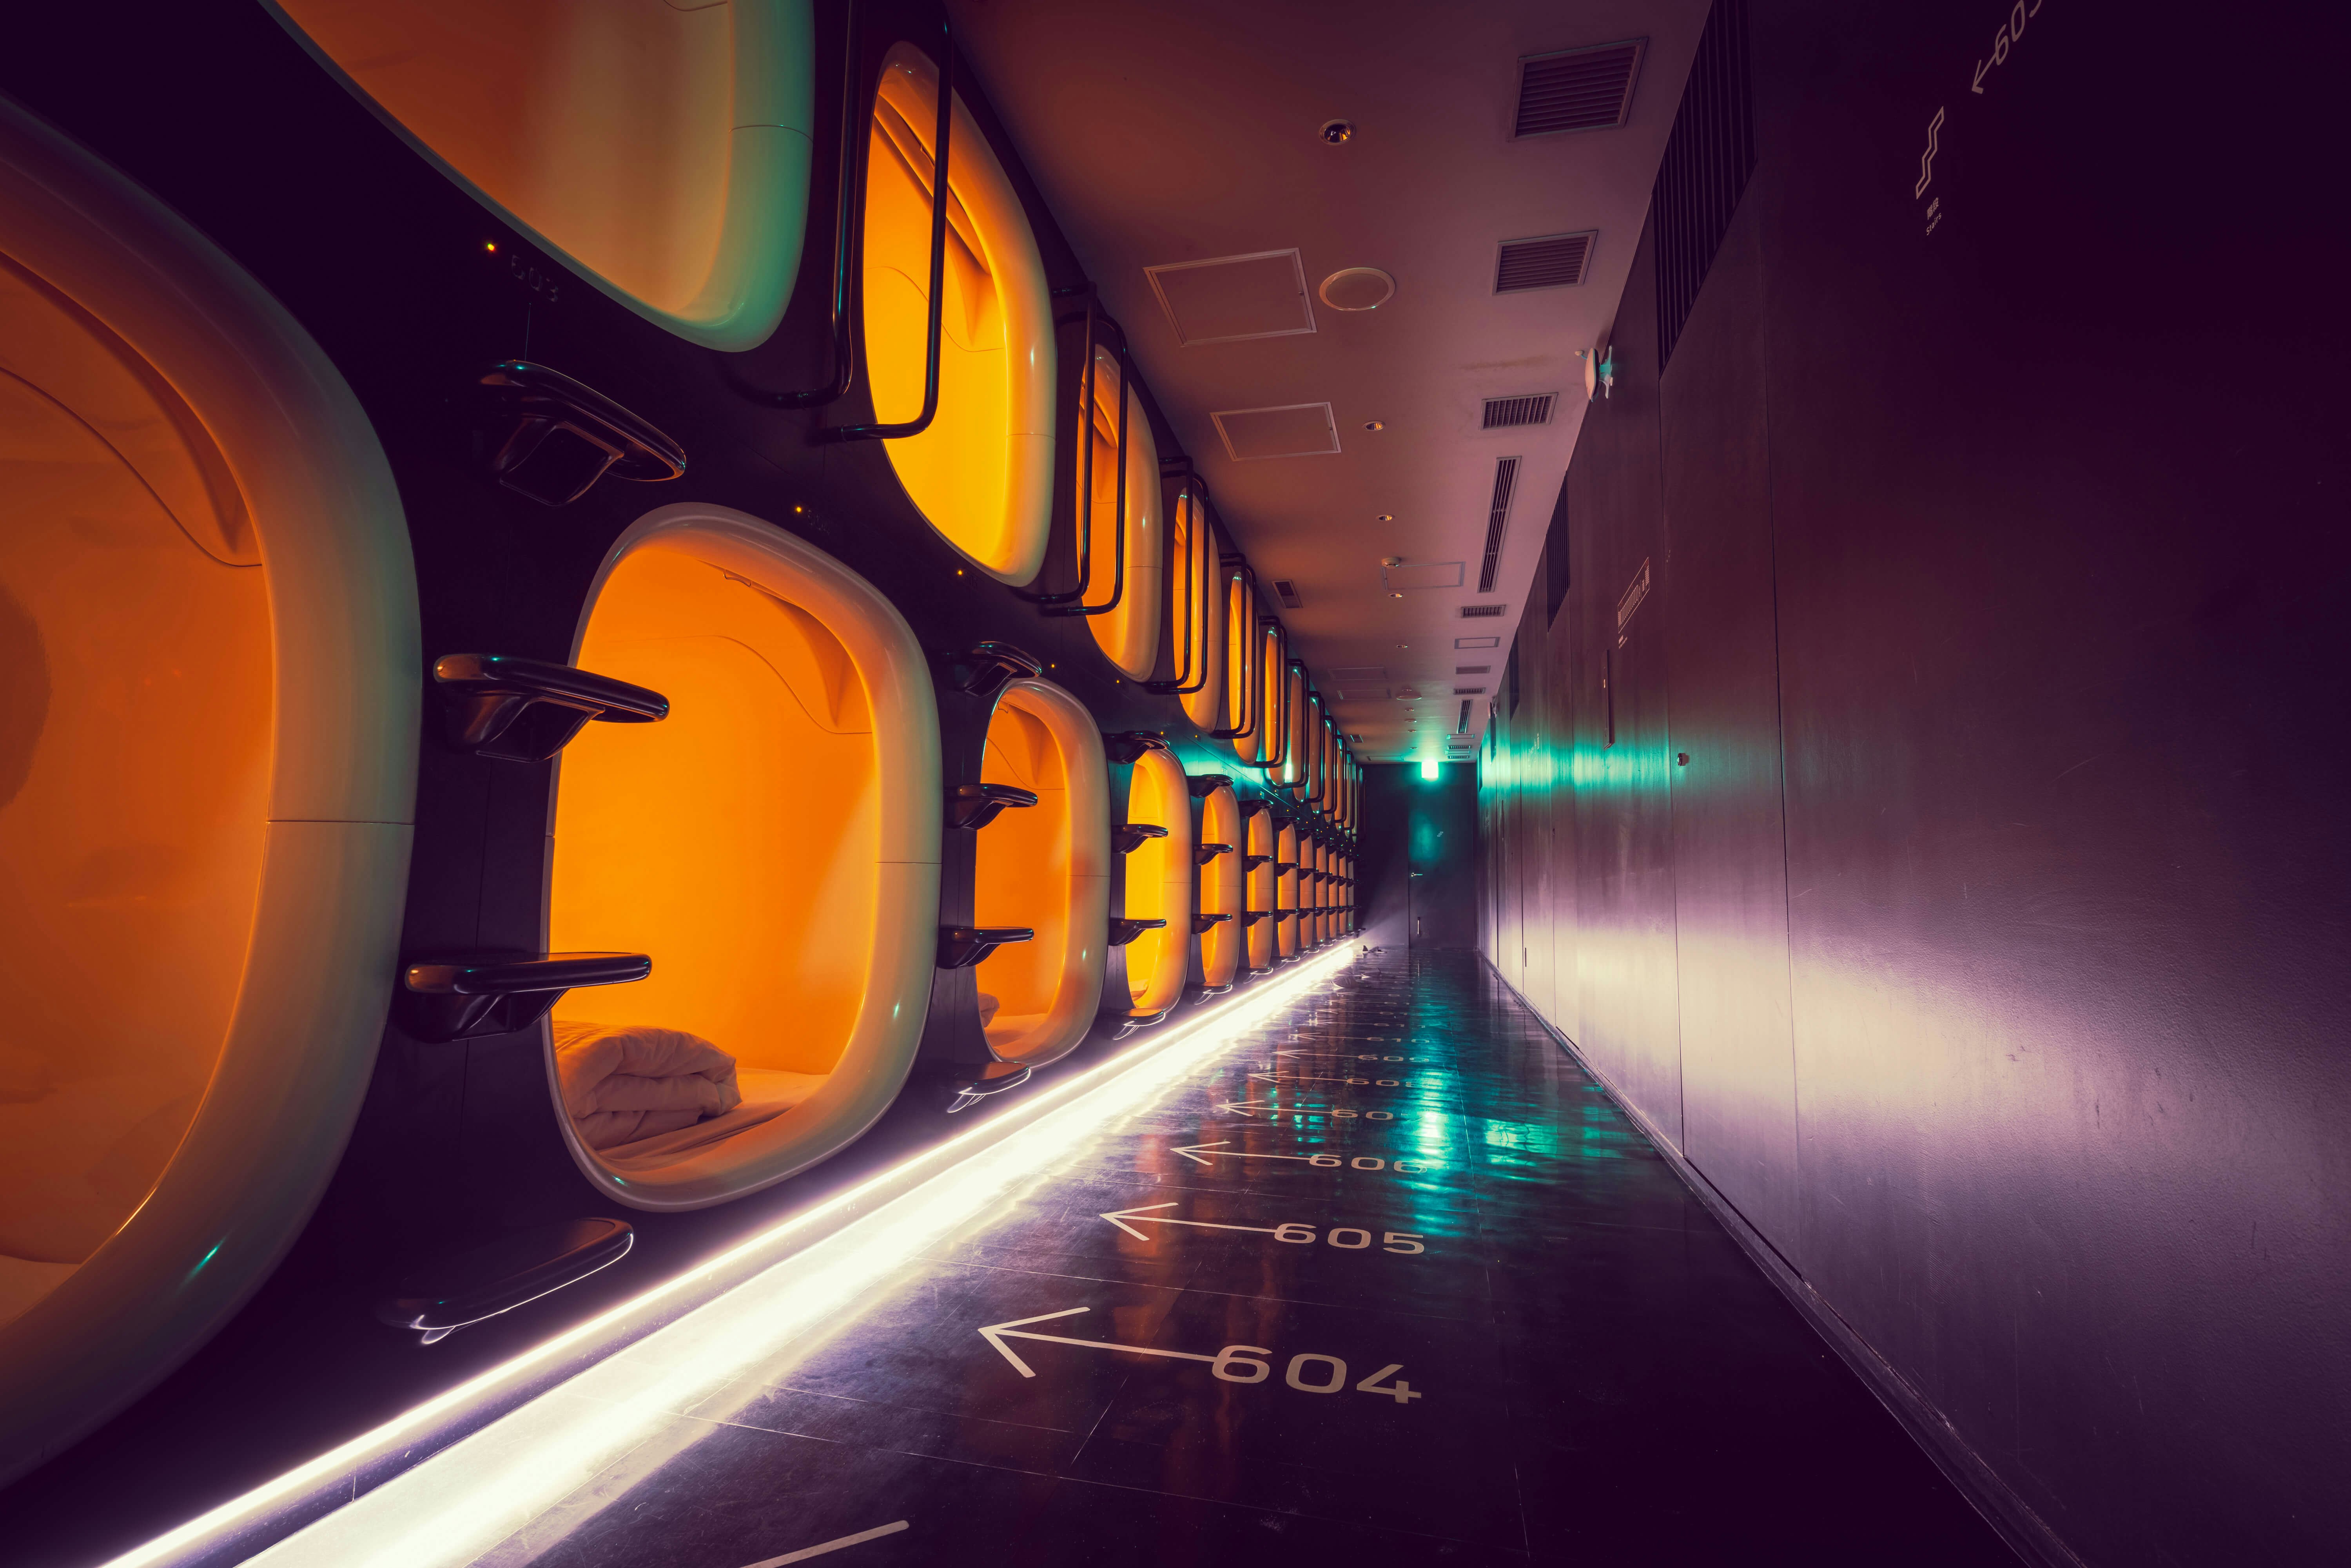 A neon-lit hallway with two levels of sleeping "capsules" running along one wall